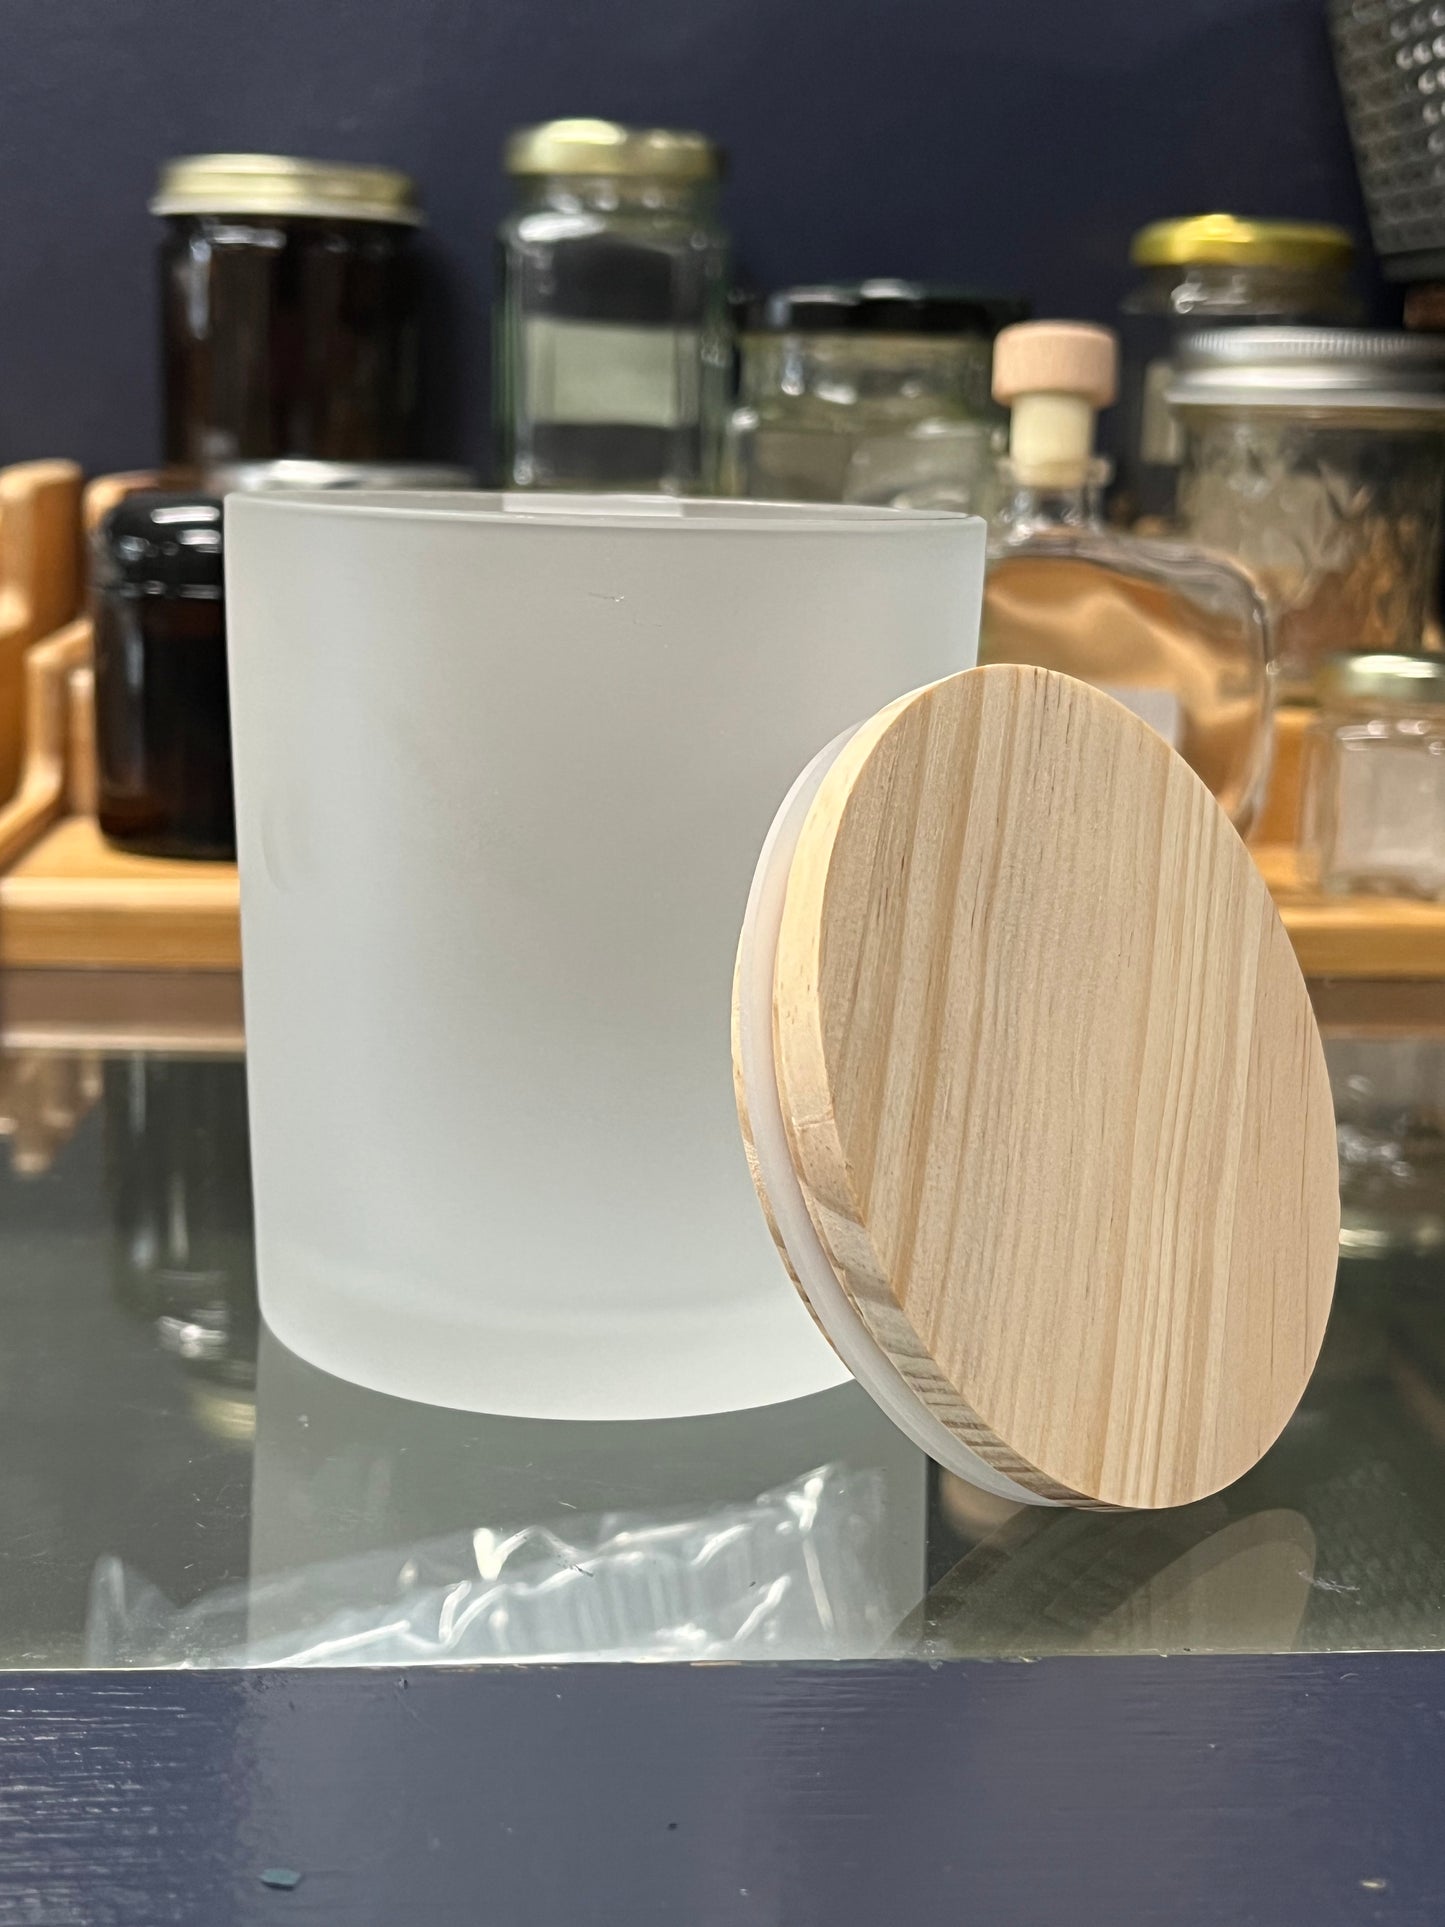 CANDLE CUP 16 OZ WOOD CAP  1 PC